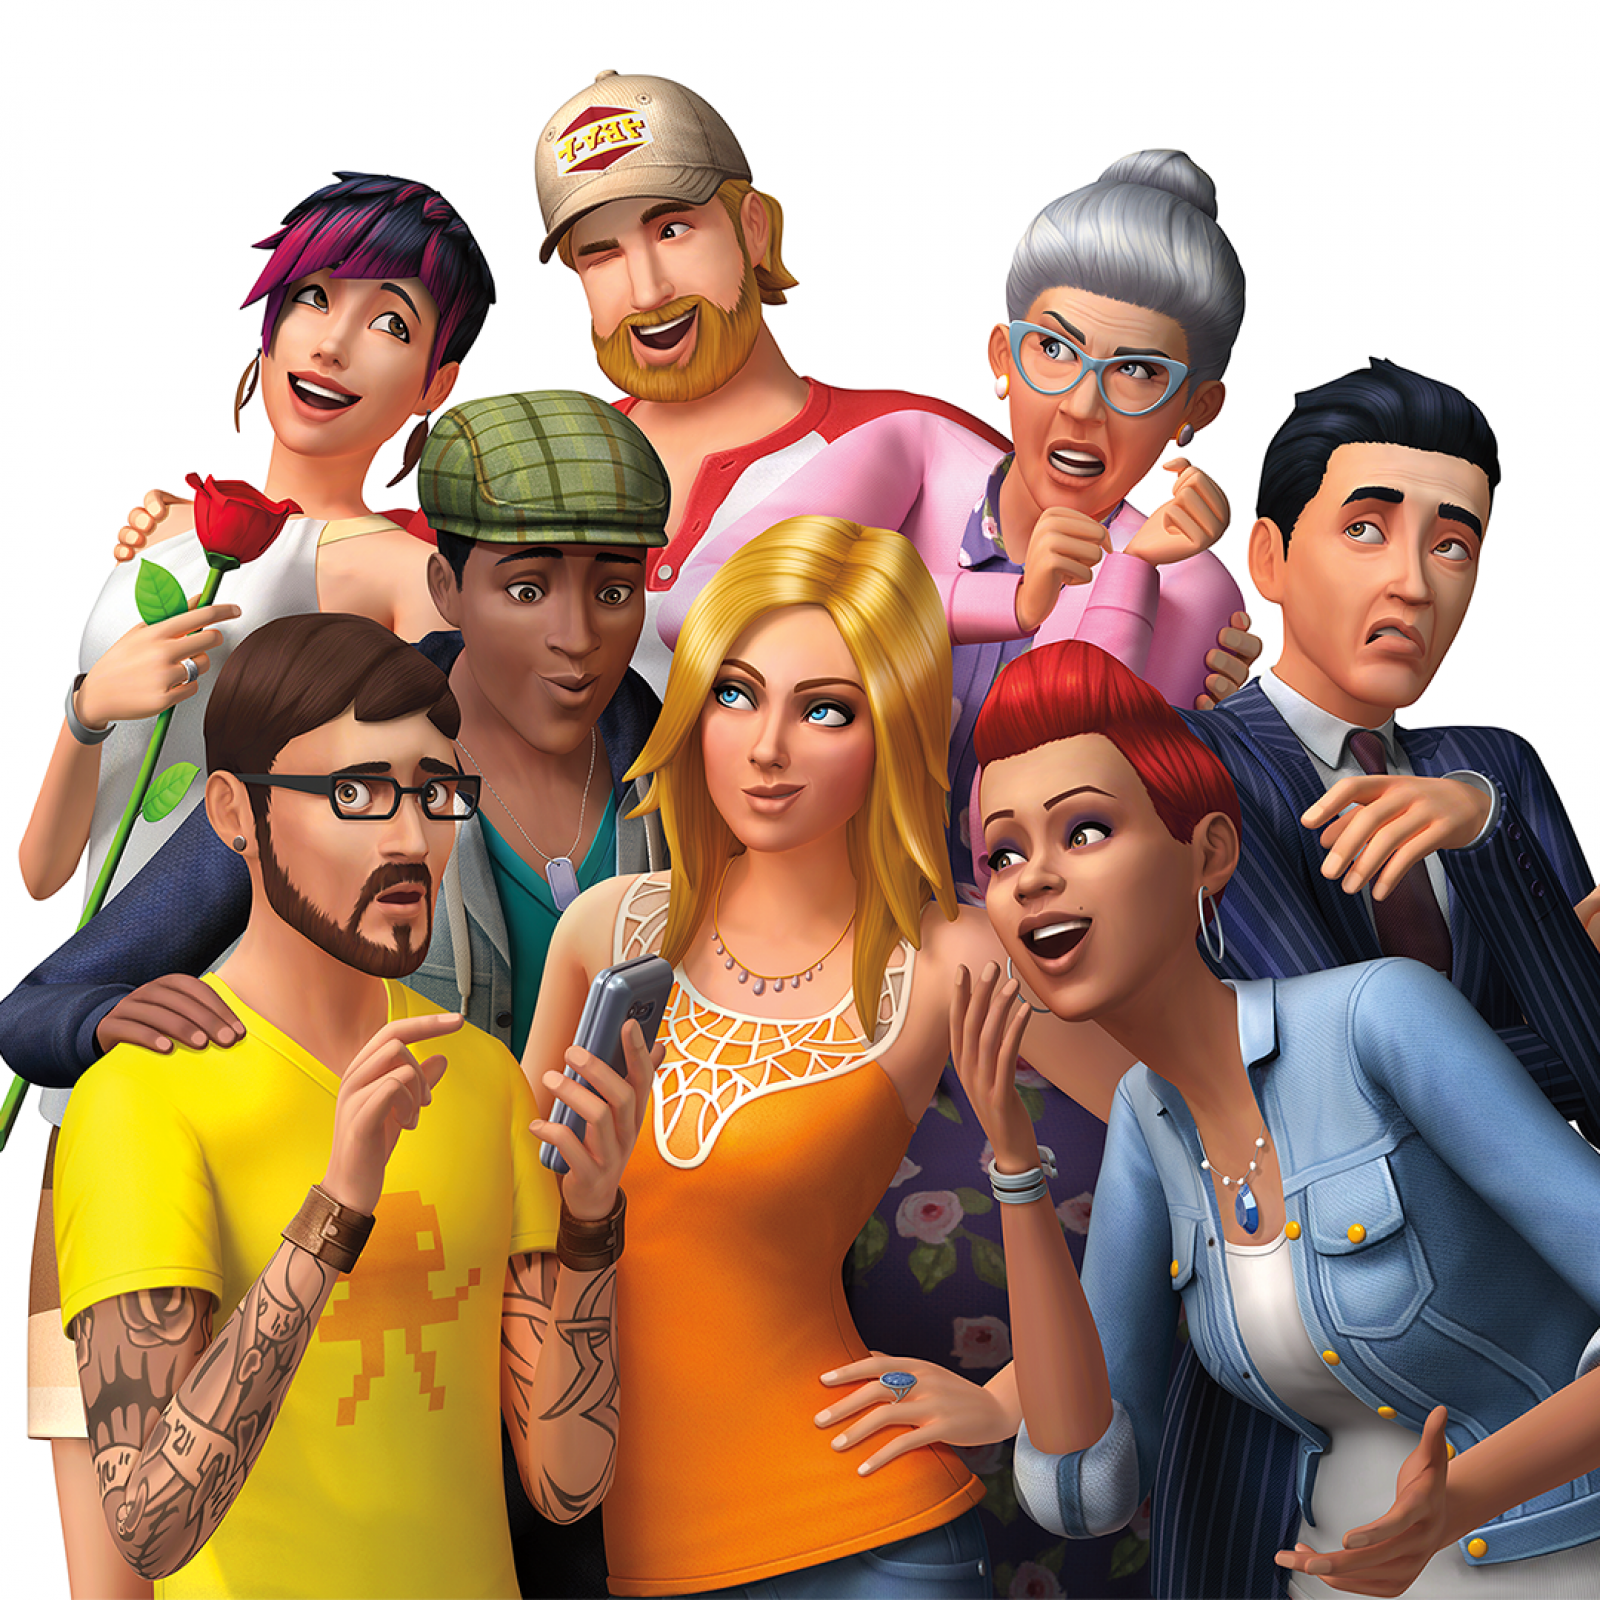 The Golden Age of Sims FreePlay